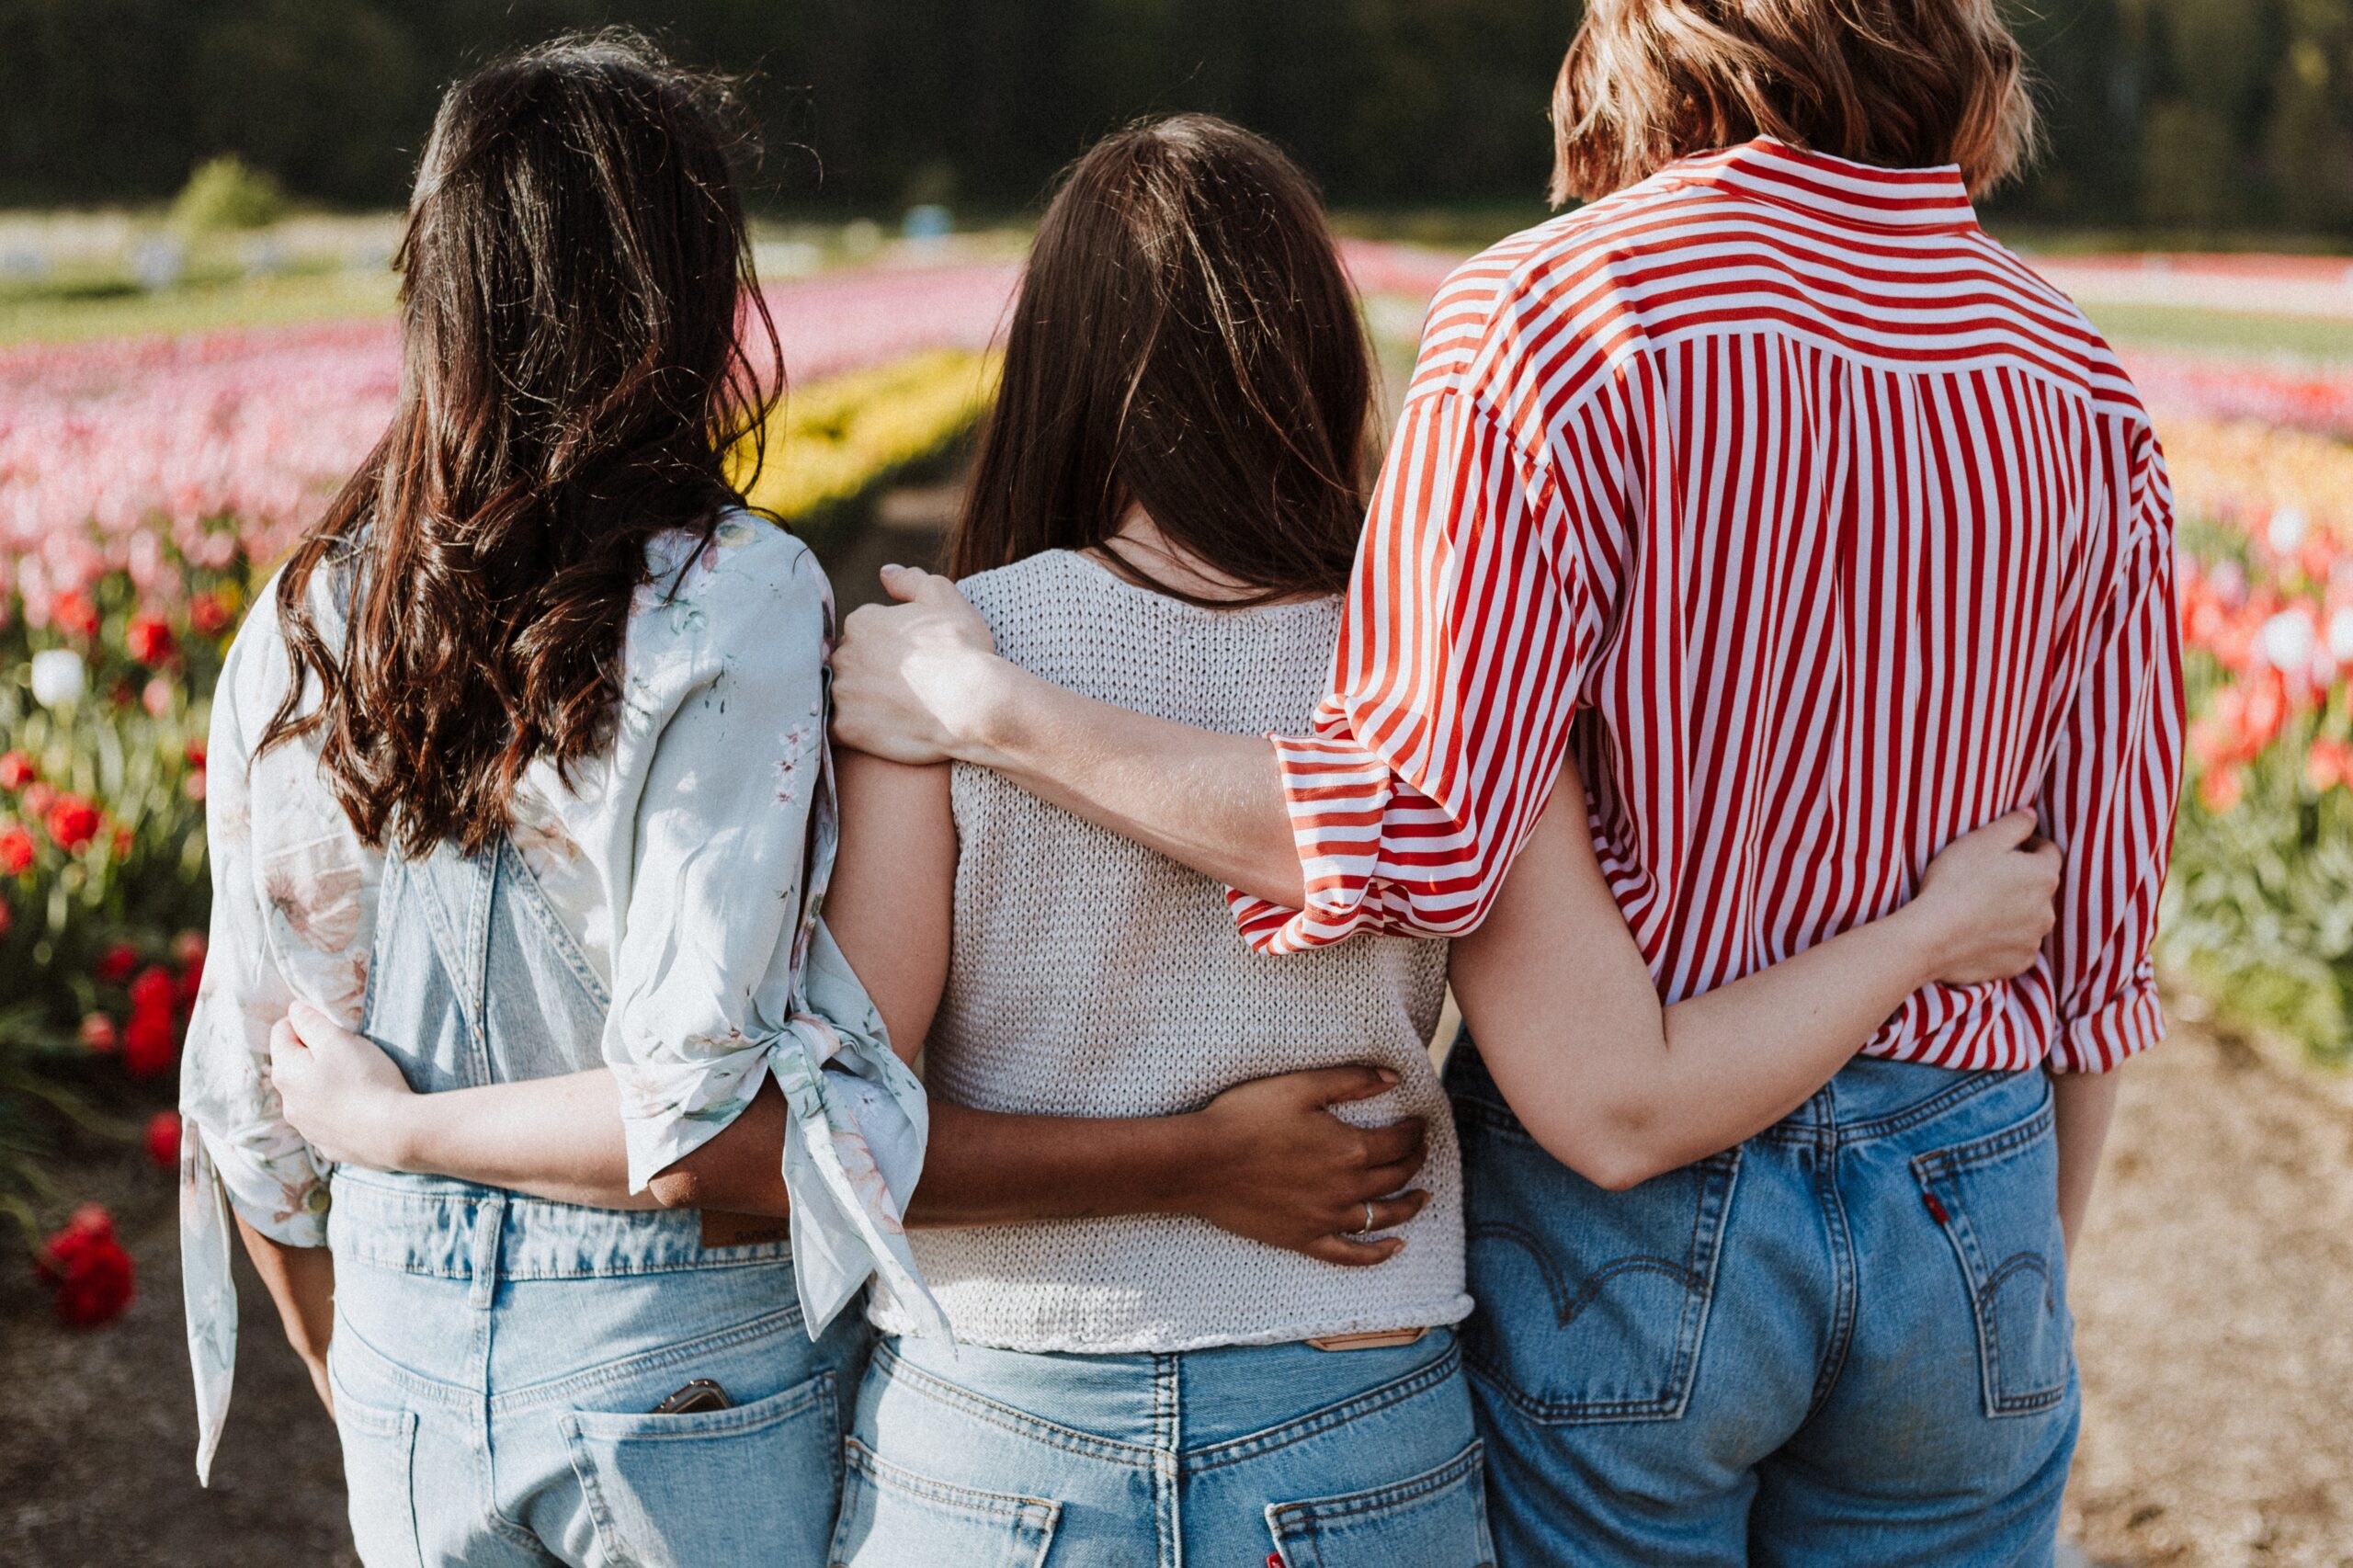 ADHD Awareness Month: 3 women hugging with their backs to camera